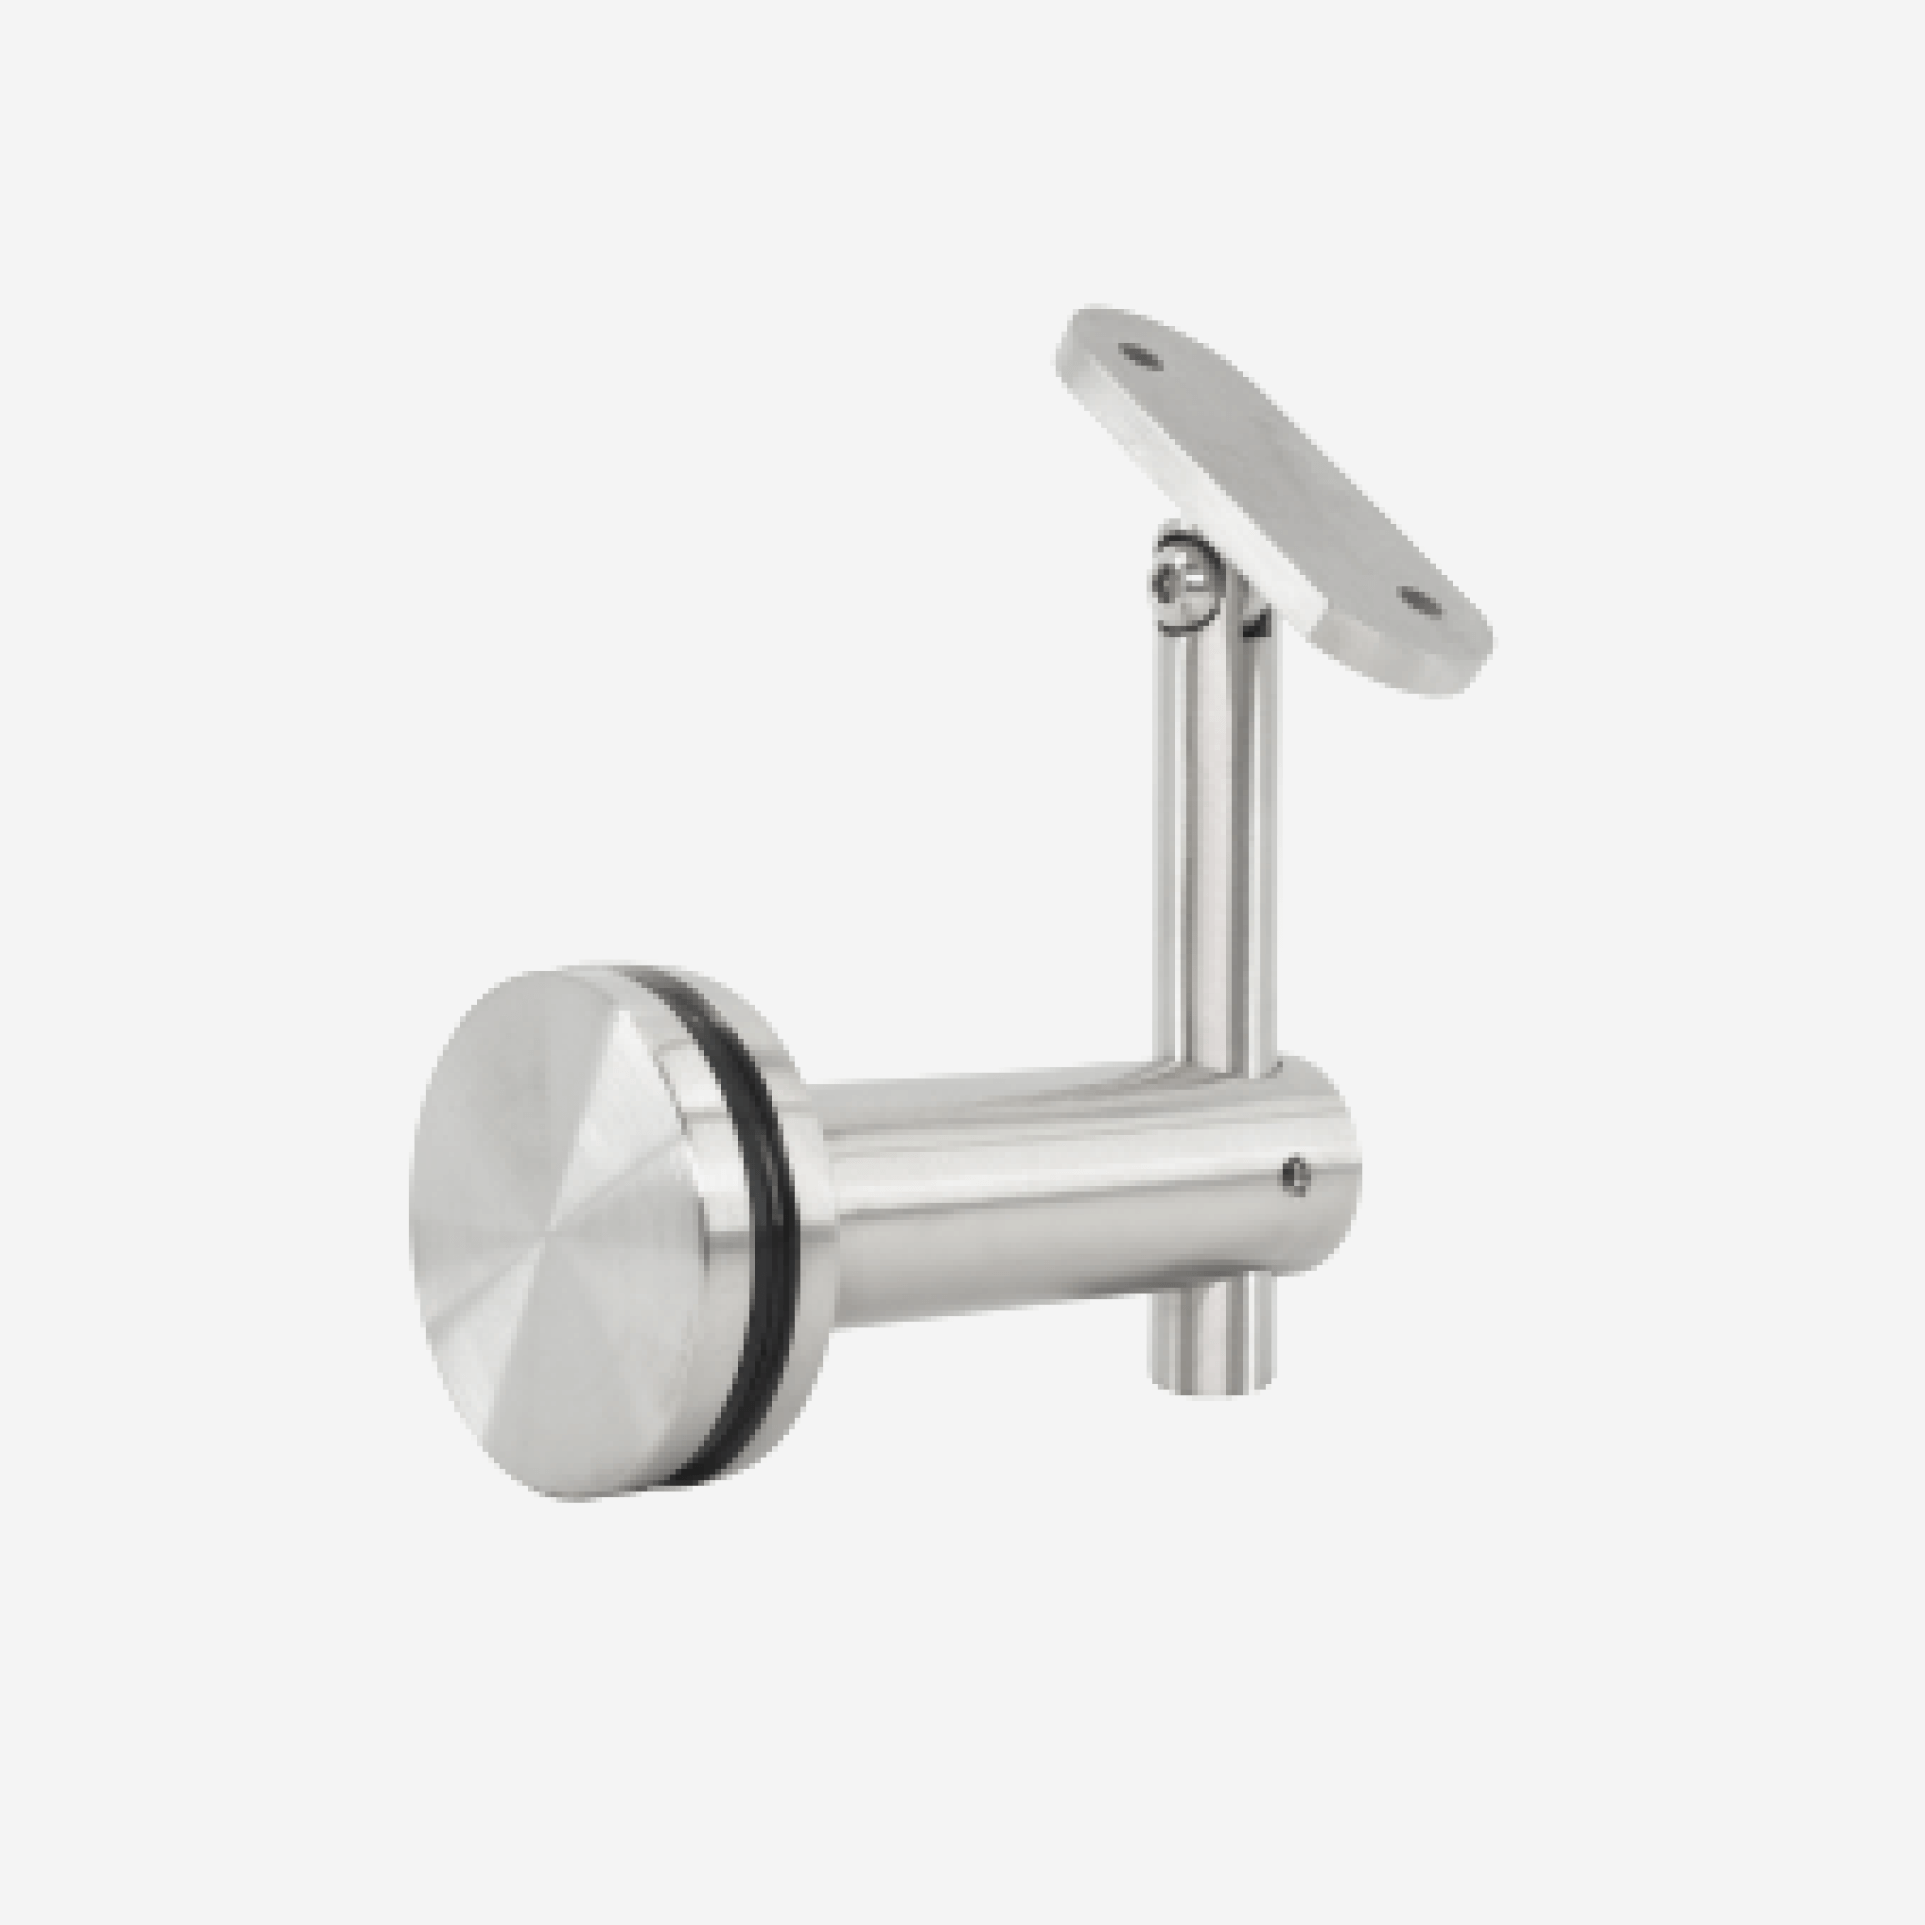 CG Brushed Stainless Glass Mounted Handrail Bracket with Round Handrail Adapter Plate